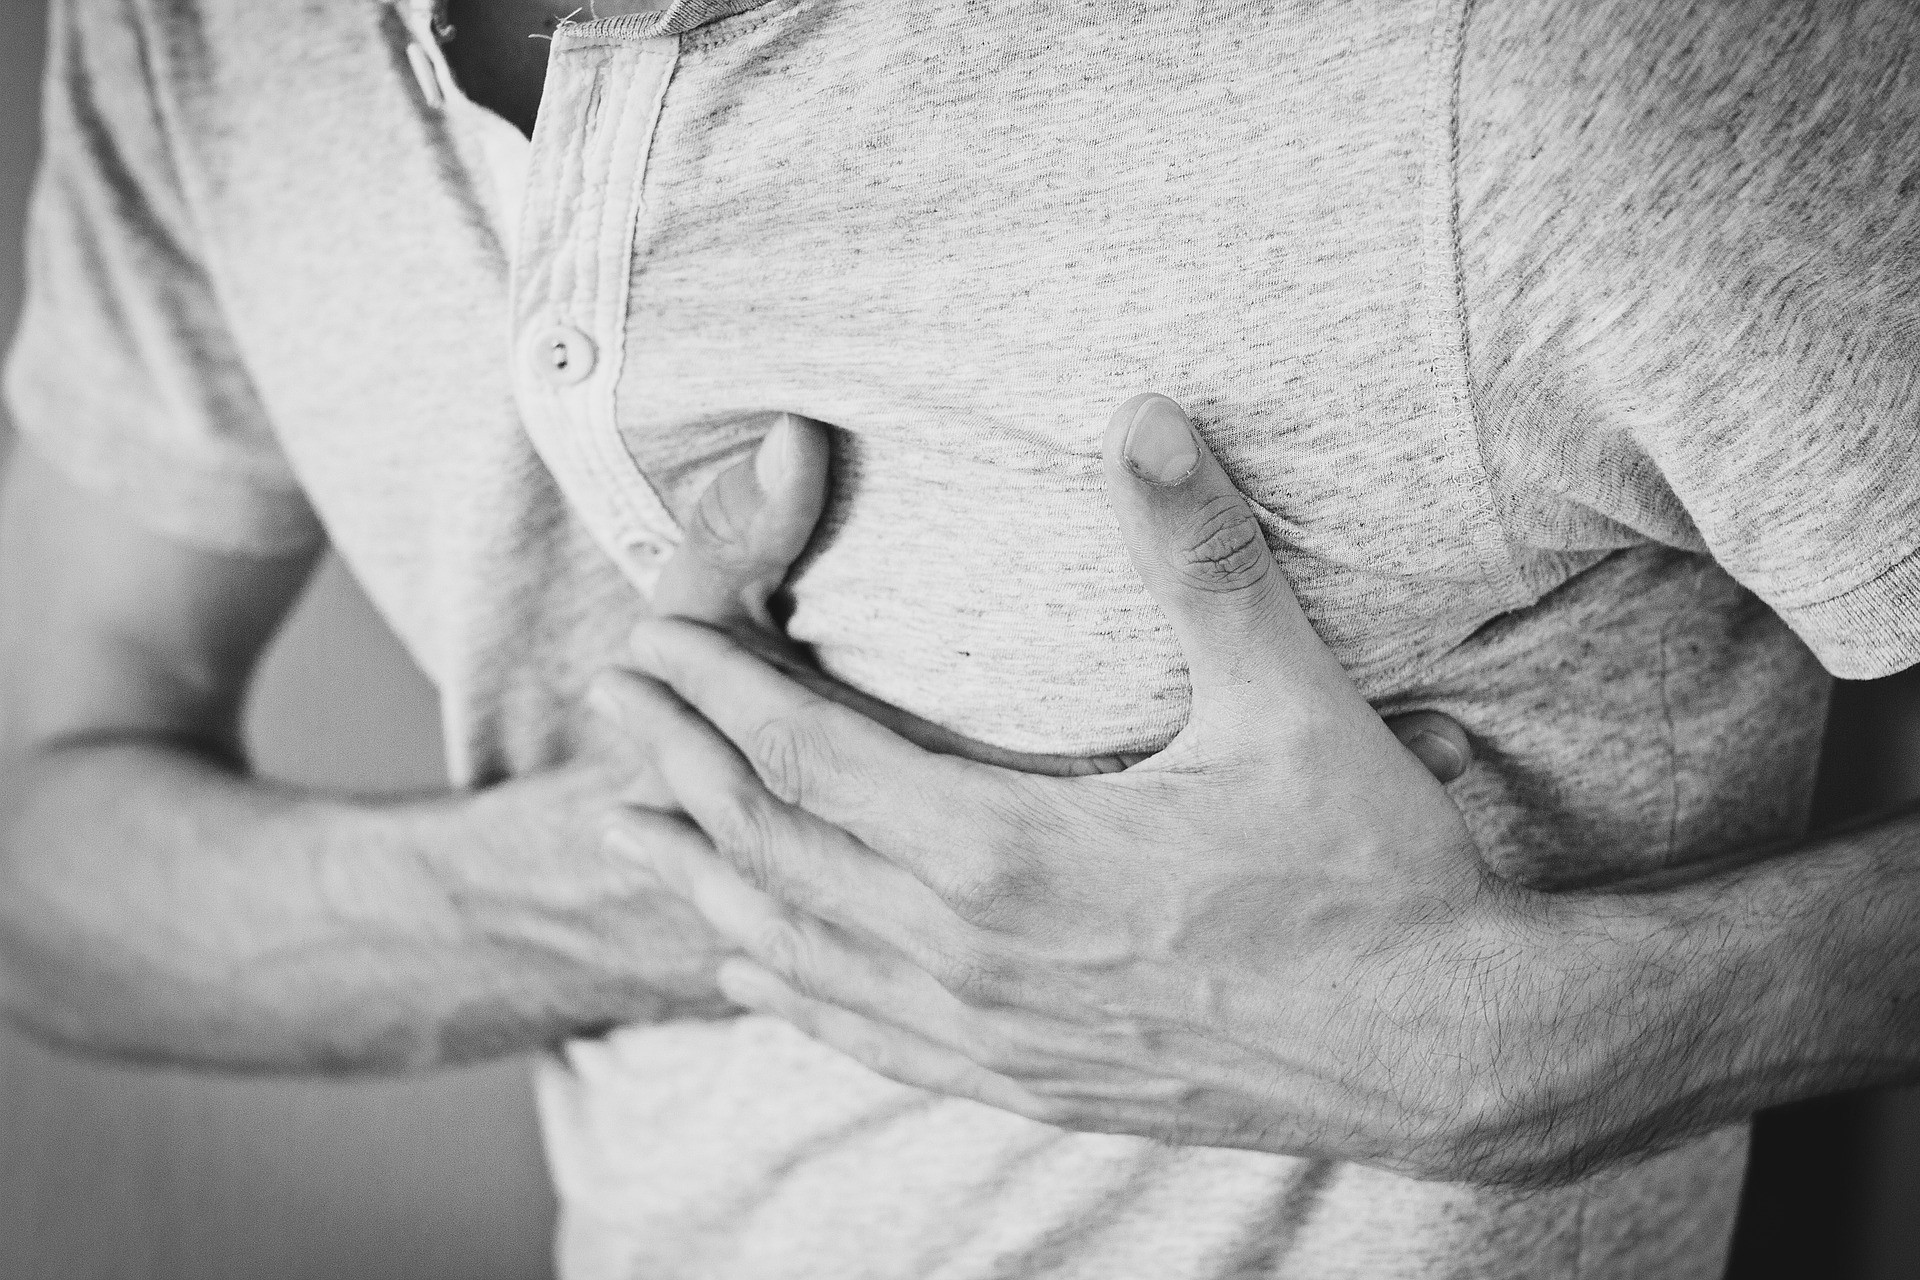 Heart palpitations can be caused by a variety of factors, including stress, anxiety, anemia, arrhythmia, low blood sugar, thyroid disease, and strong emotions.